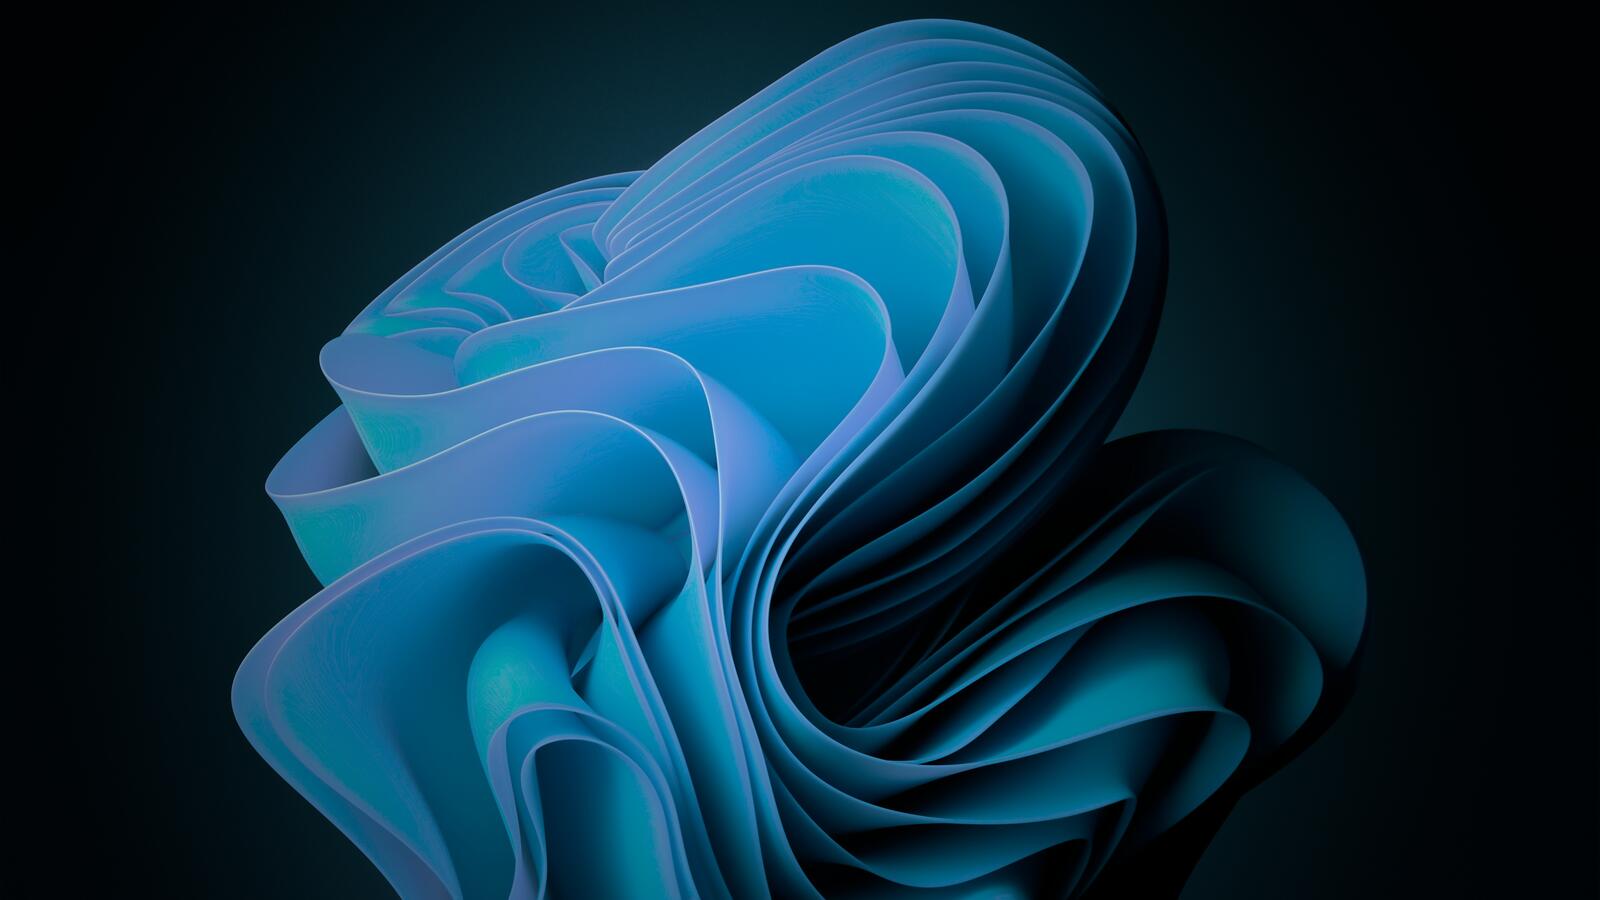 Wallpapers artwork abstraction minimalism on the desktop